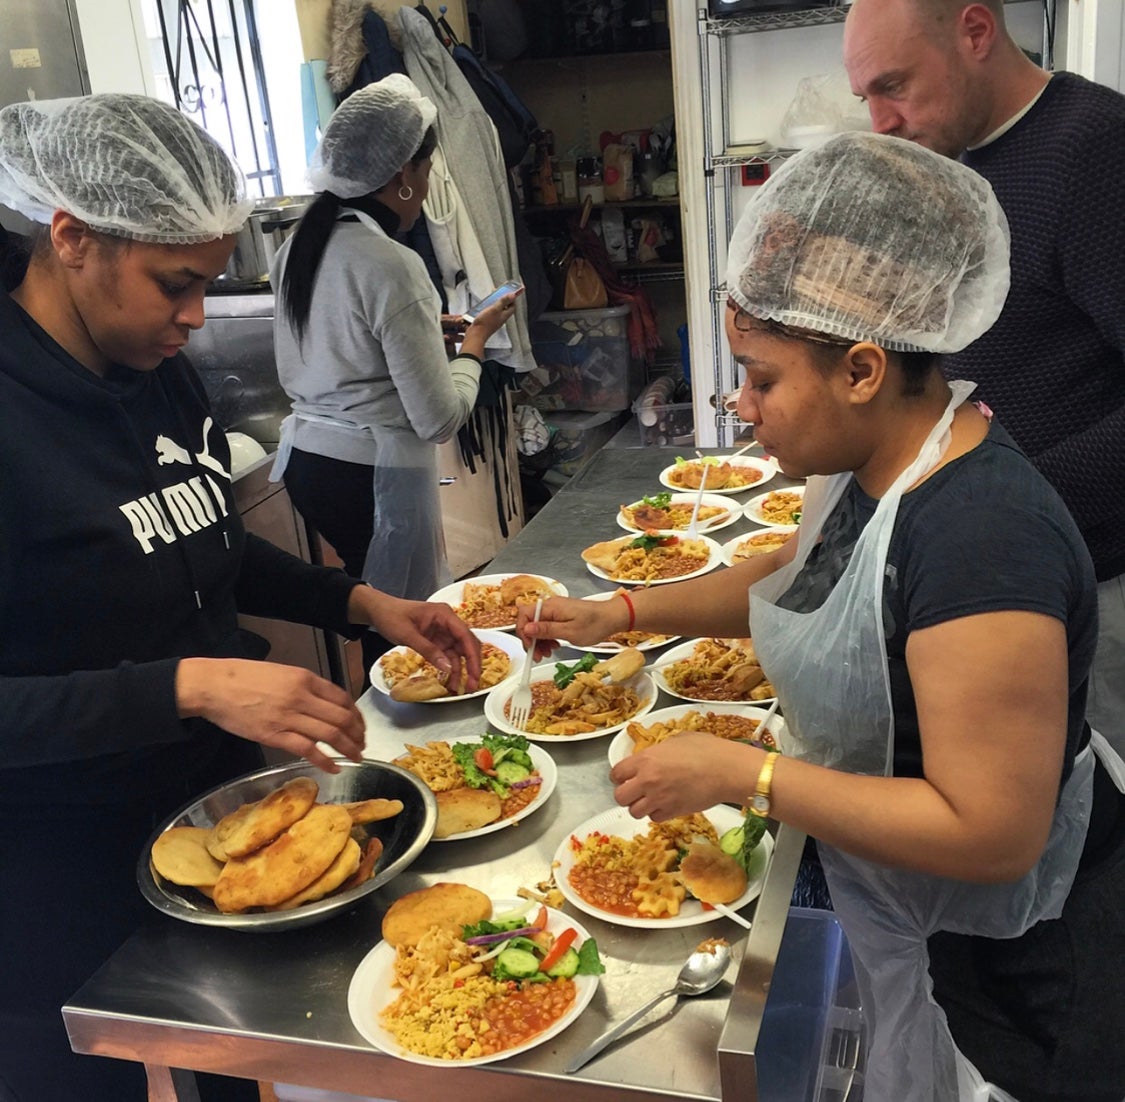 Helpers at the Brixton Soup kitchen prepare meals for people who are homeless